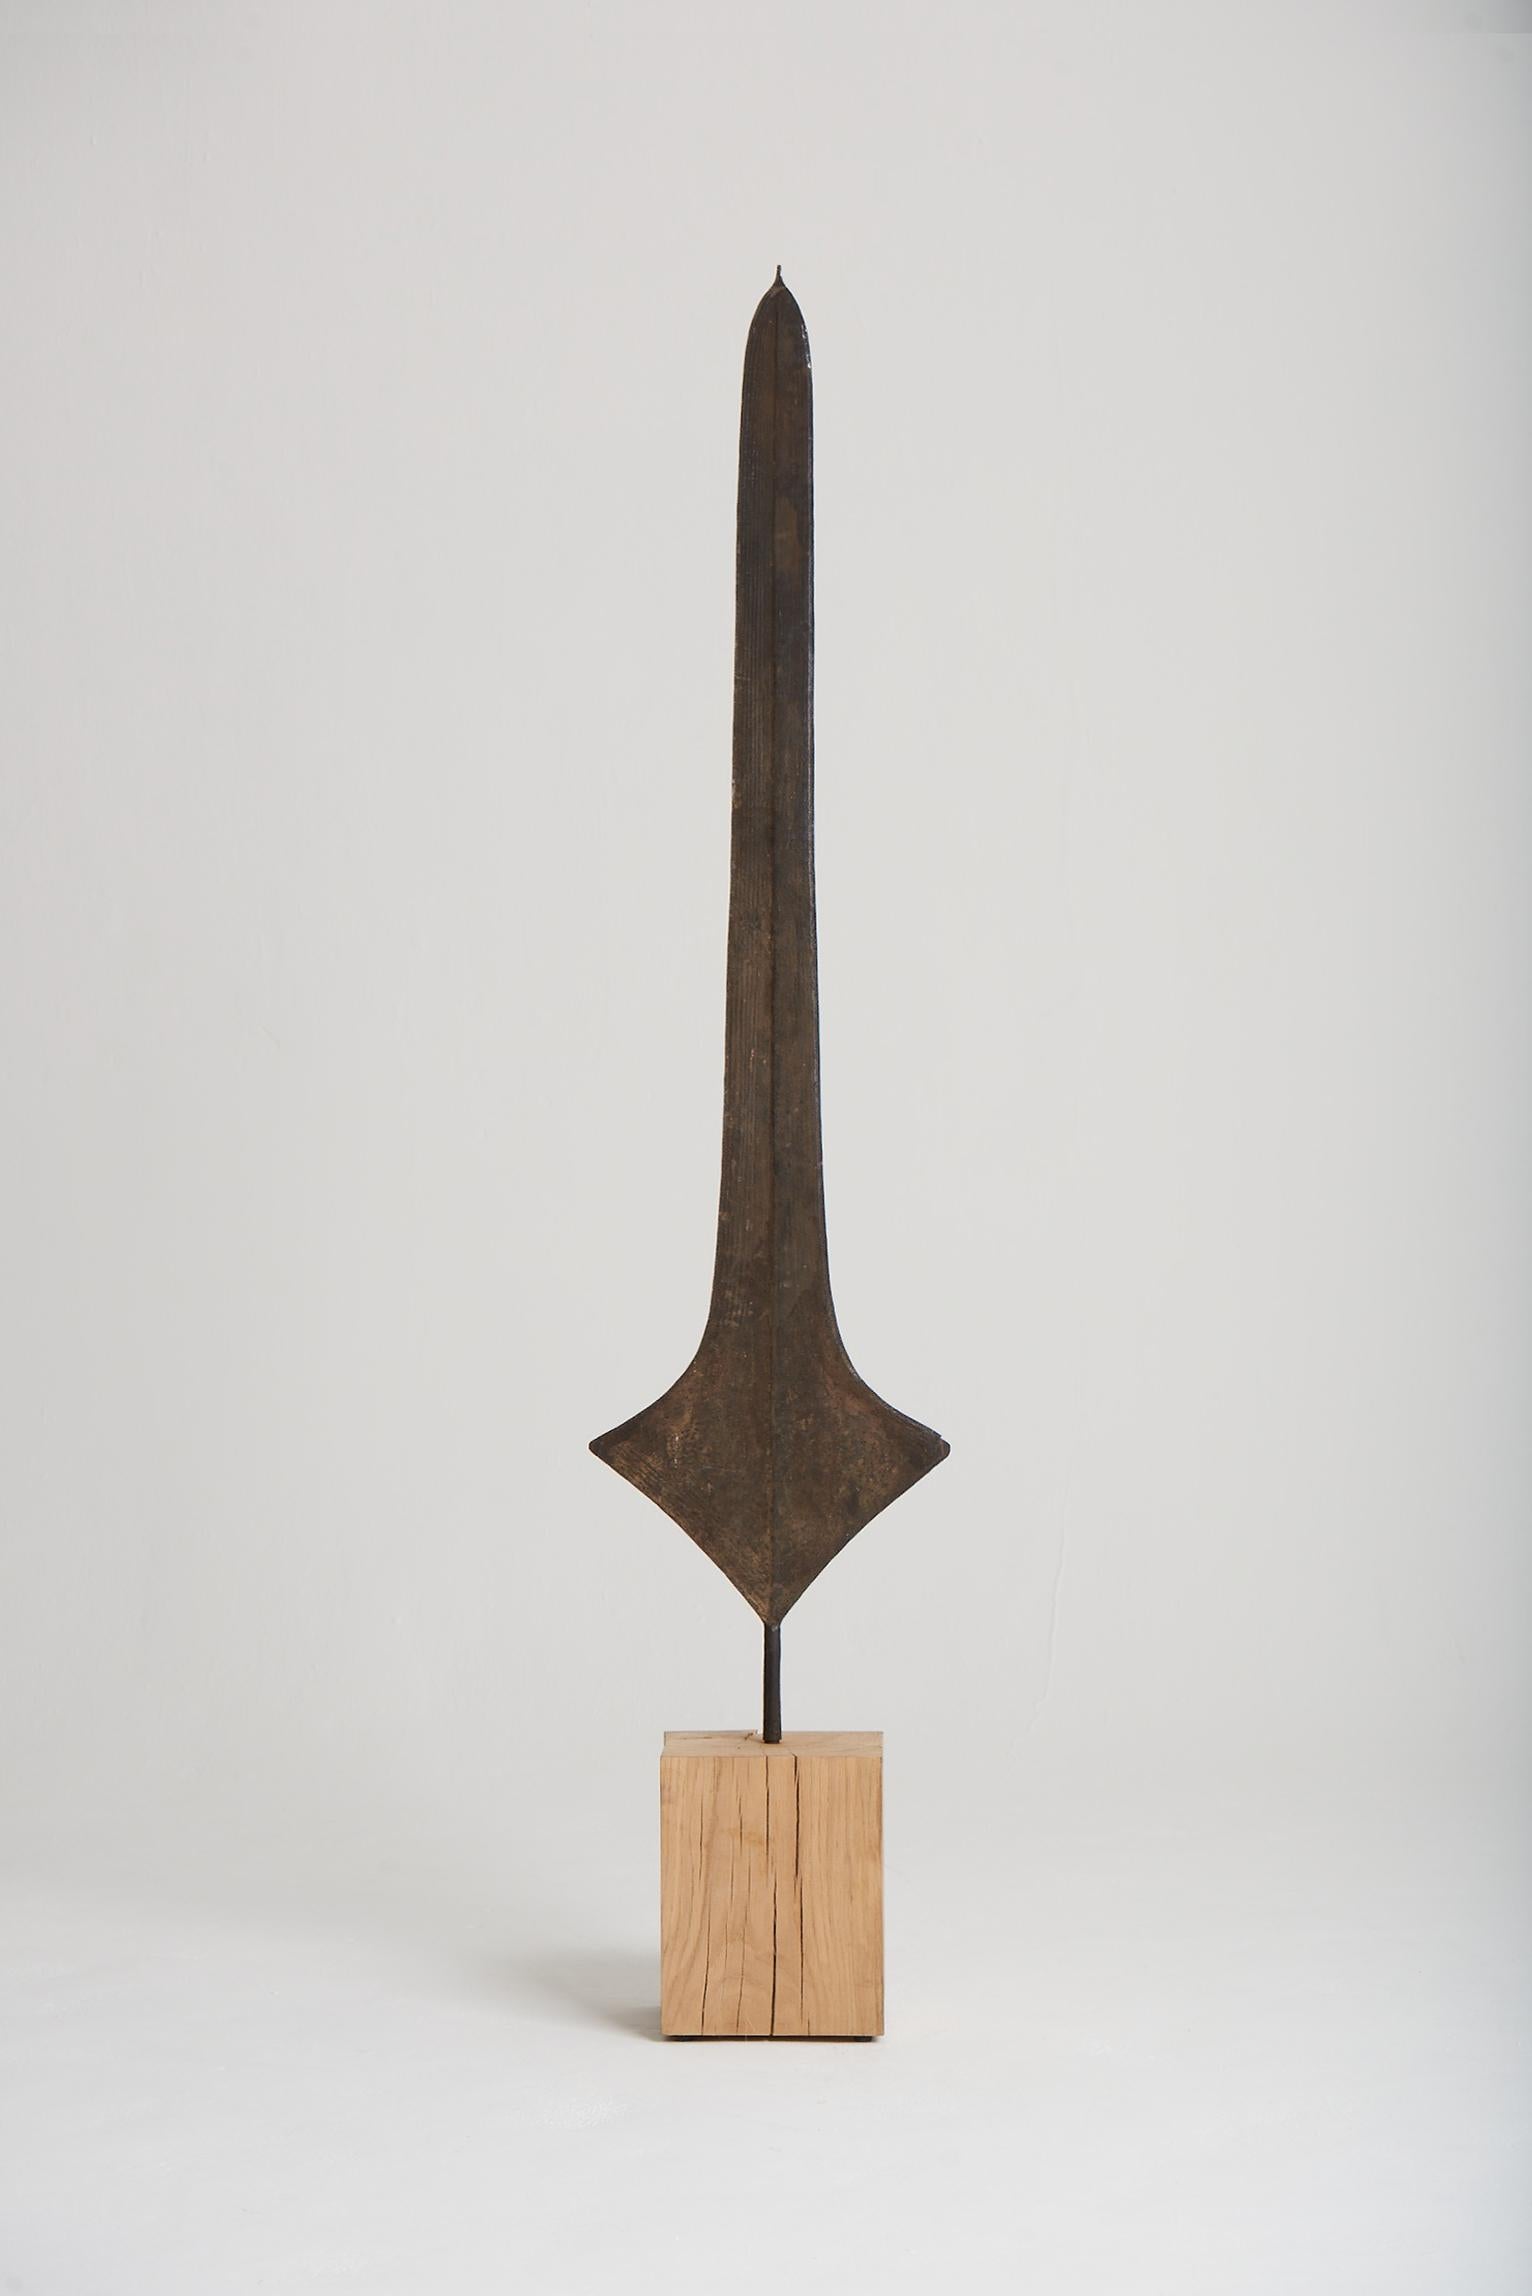 An iron Topoke sword currency, mounted on a solid oak base.
Democratic Republic of Congo (Zaire), early 20th century.
Such blades were used by various tribal groups in the Democratic Republic of Congo as a form of currency by the Nkutshu, Topoke &